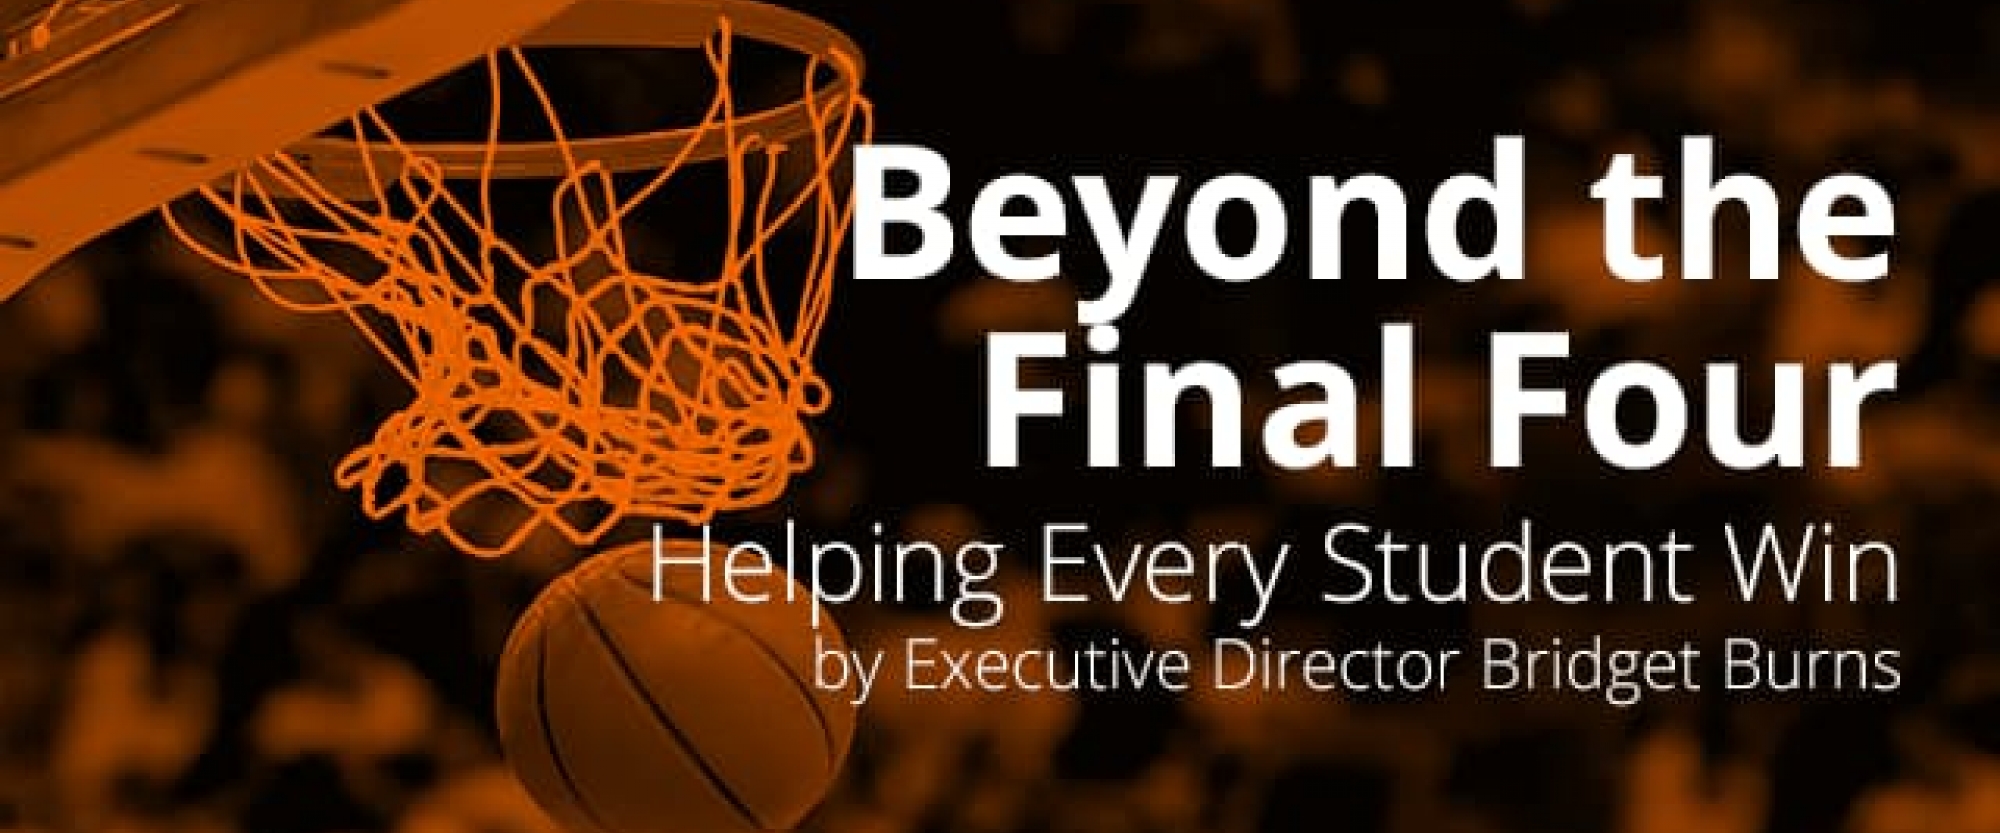 Beyond the Final Four: Helping Every Student Win